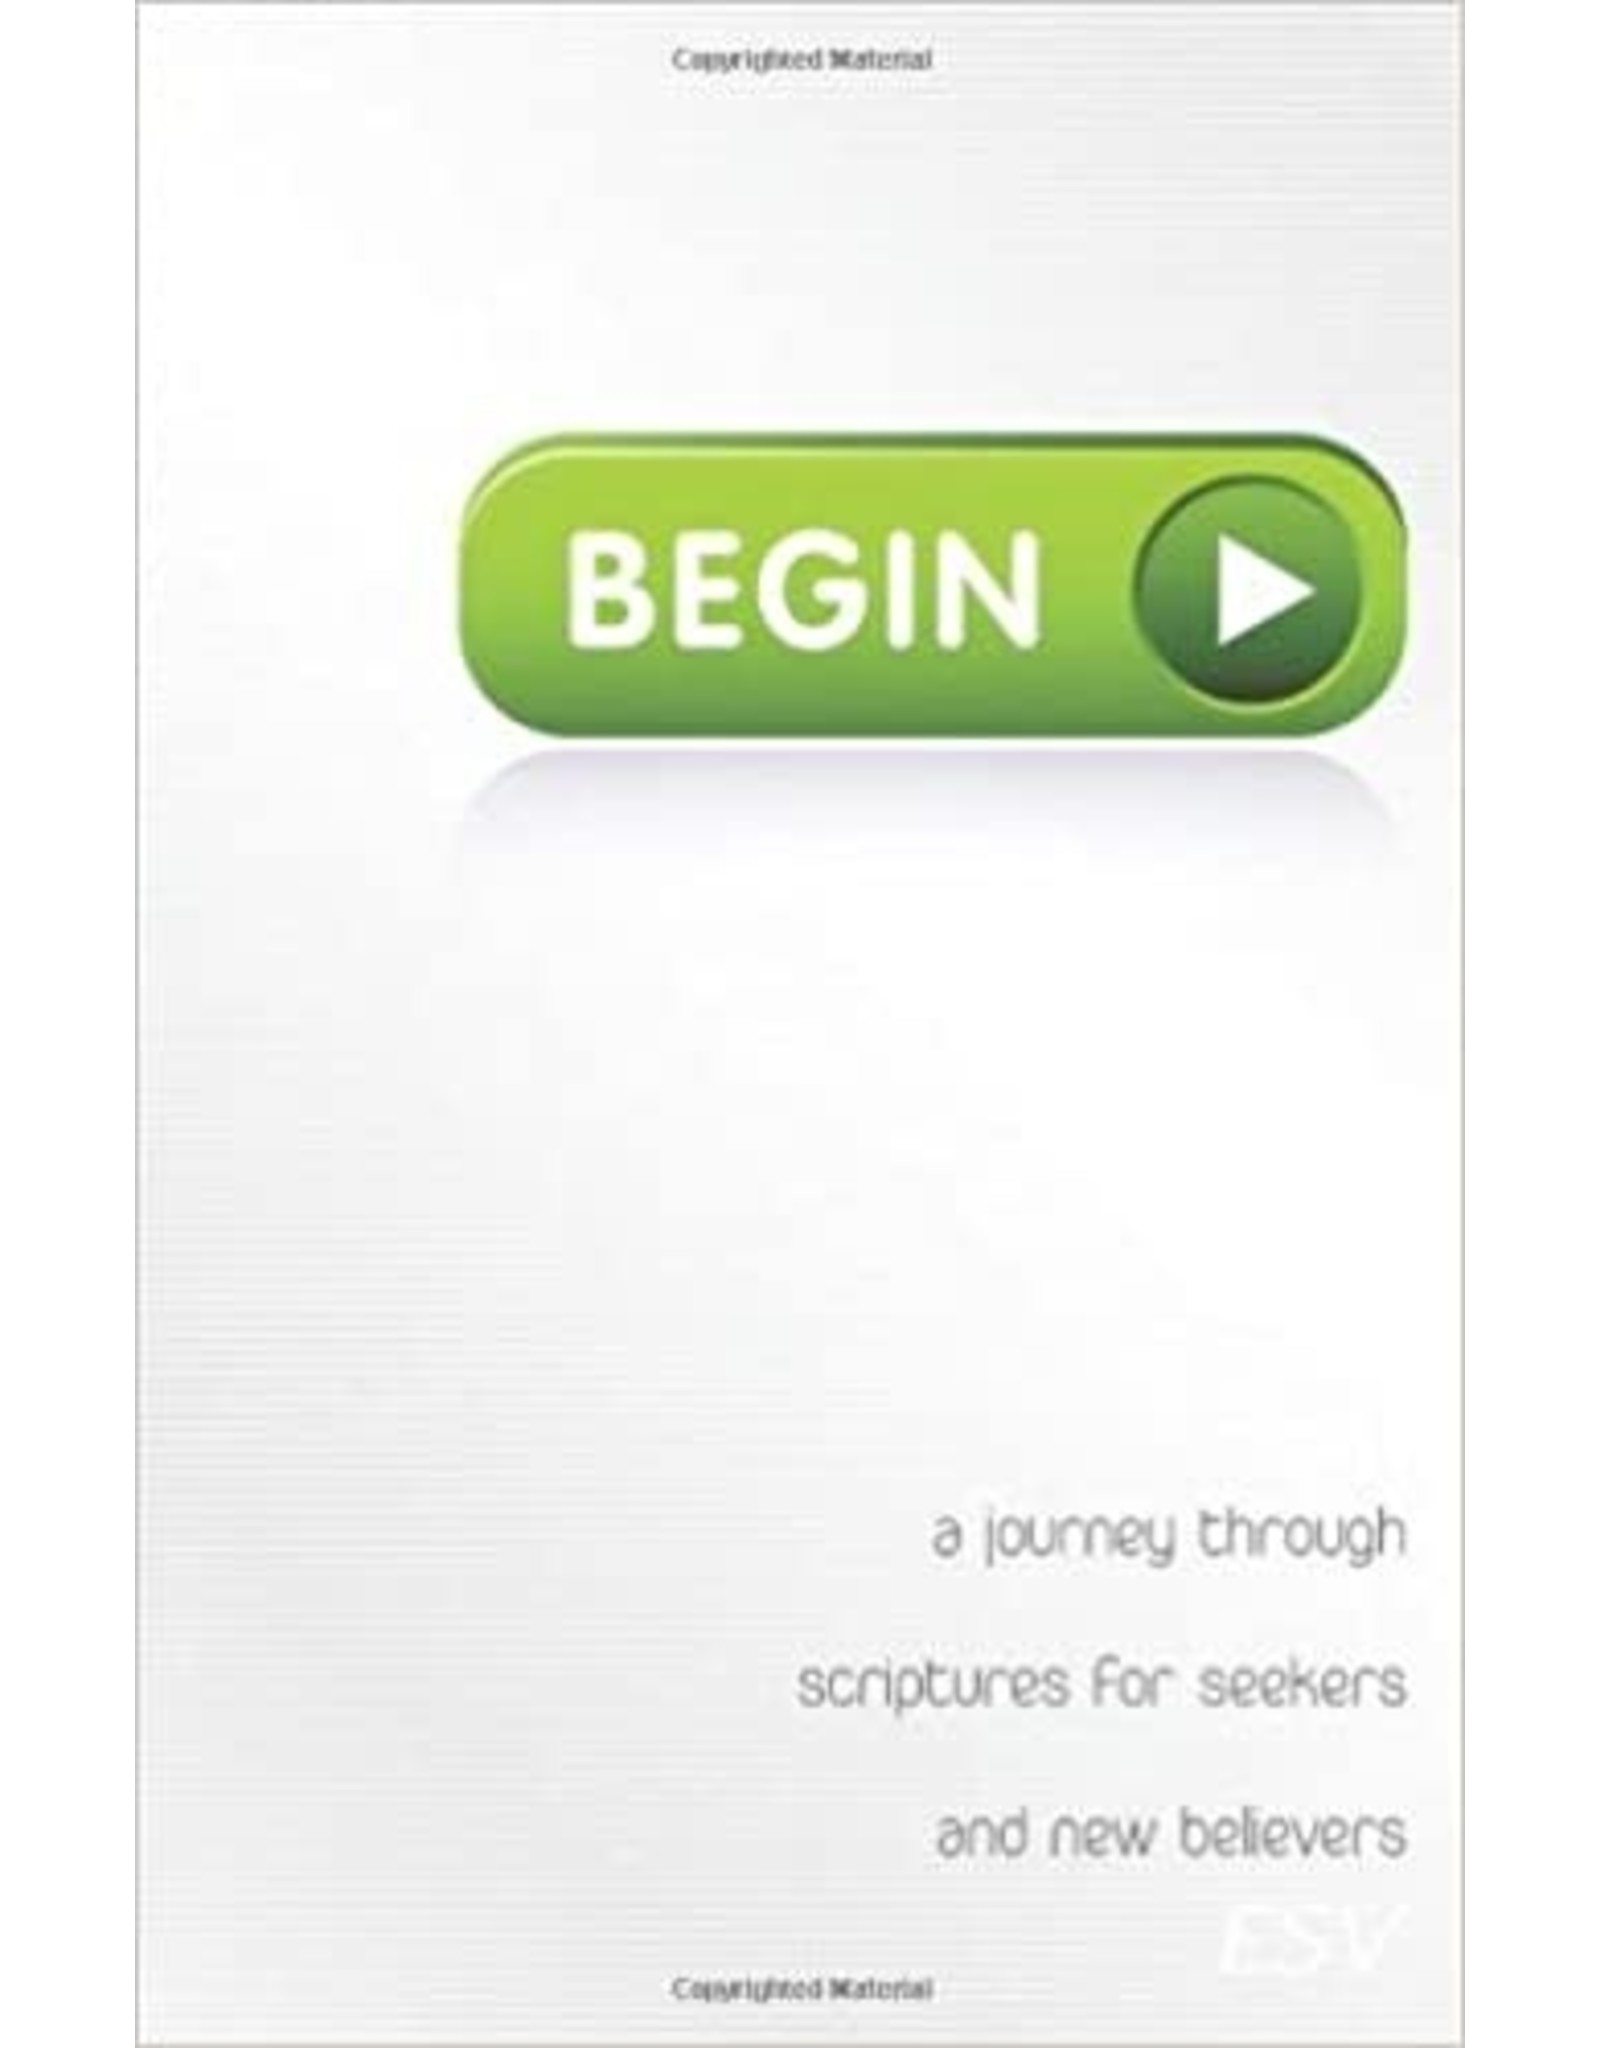 Ken Ham. & Bodie Hodge Begin: A Journey Through Scriptures for Seekers and New Believers